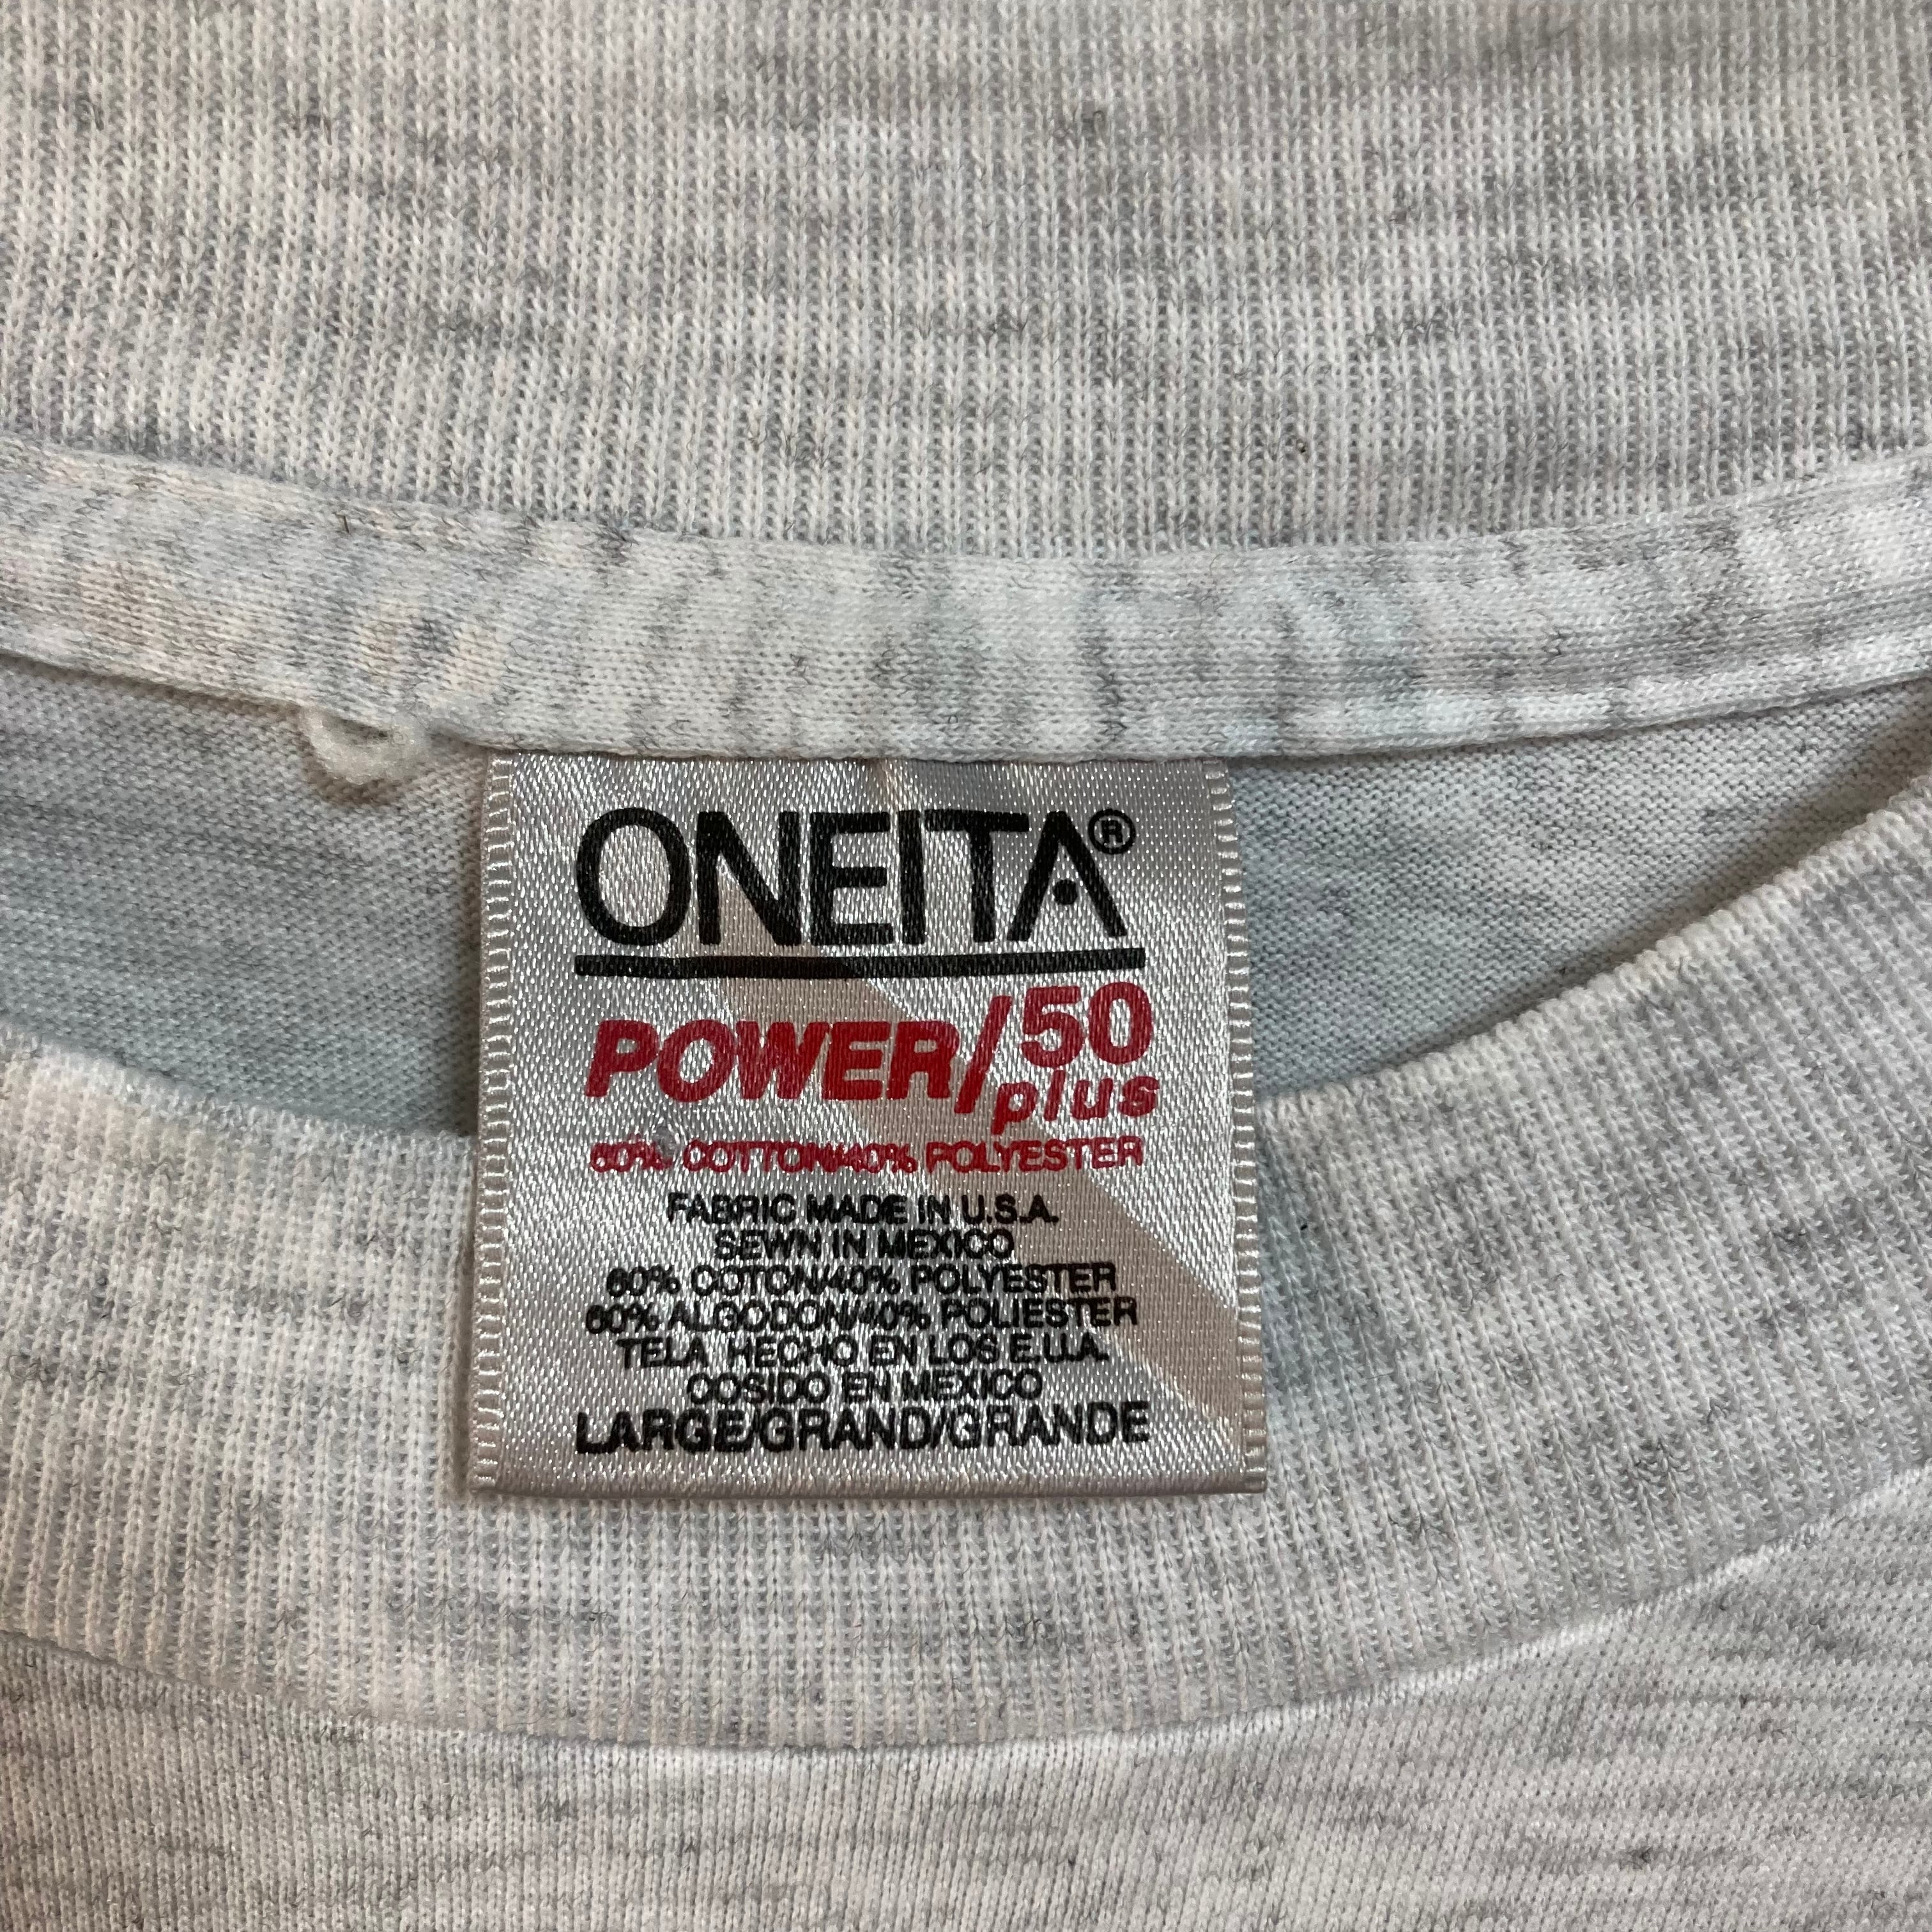 ONEITA,made in USA,両面プリント シングルステッチ~'90